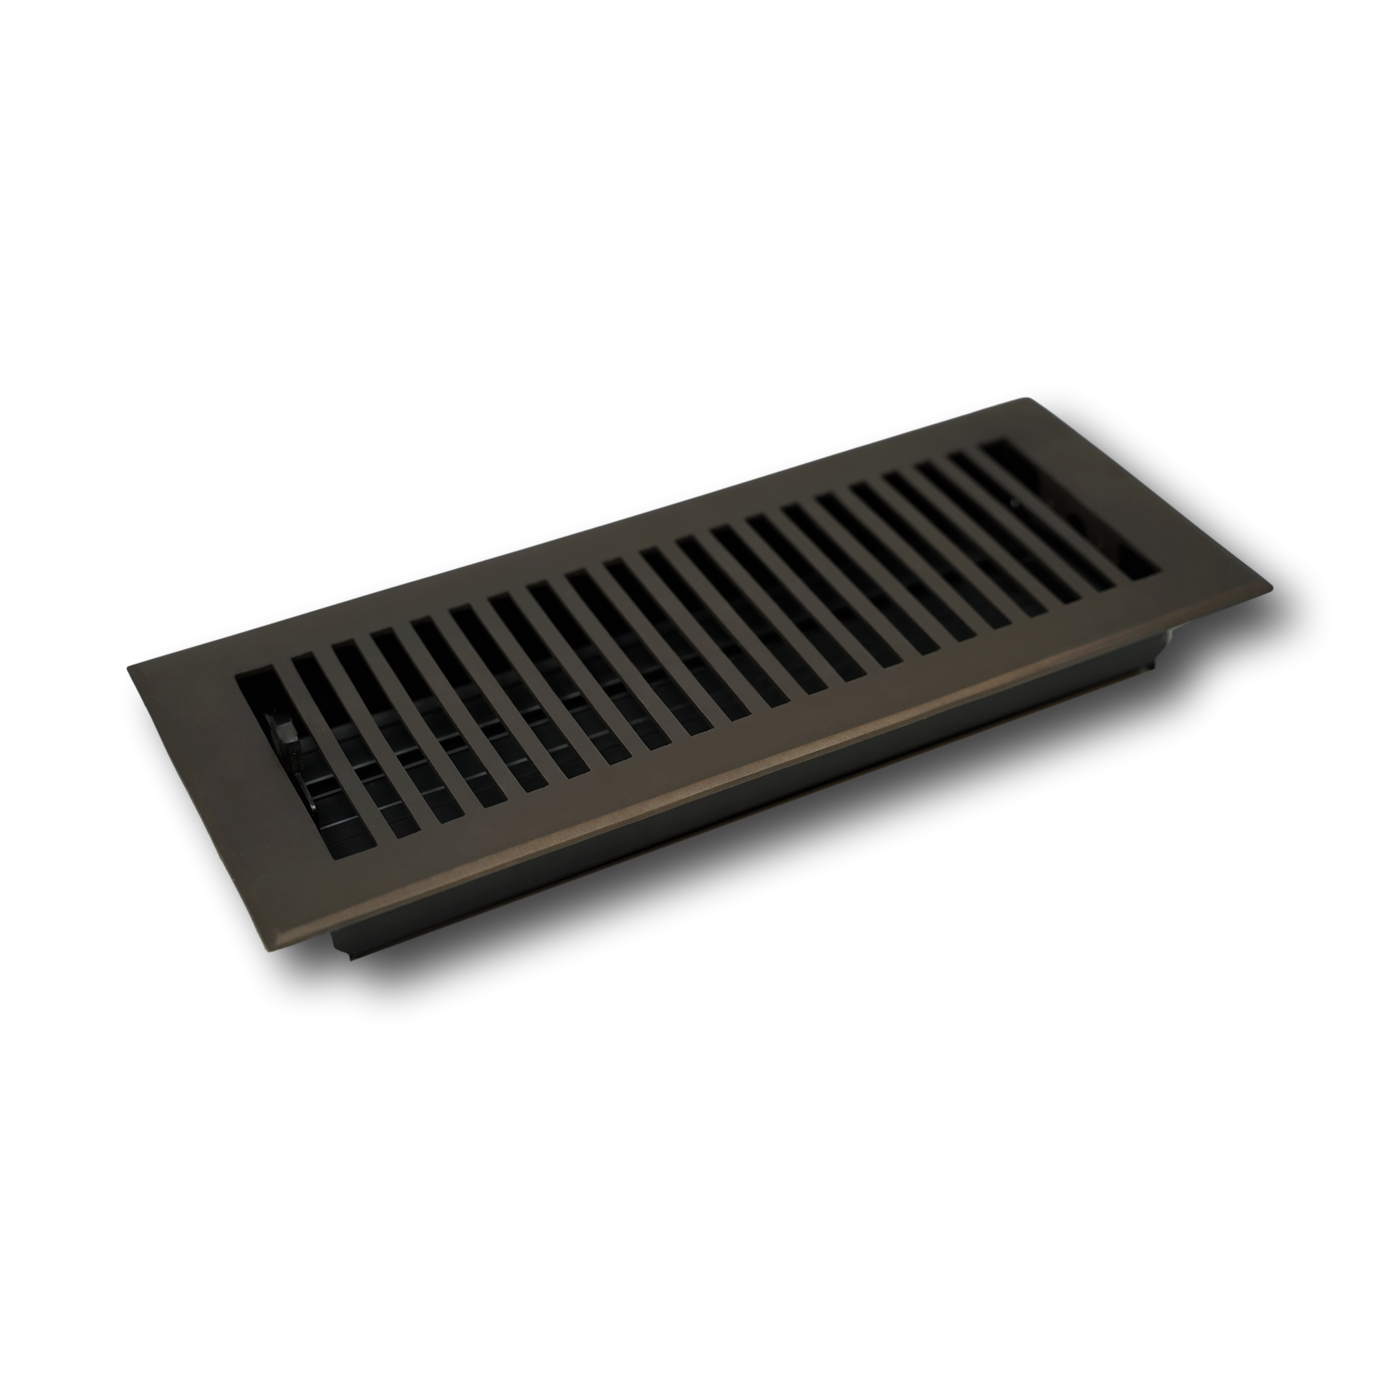 Cast Brass Contemporary Vent Covers - Oil Rubbed Bronze - 4" x 10" (Overall: 5-1/4" x 11-1/2")